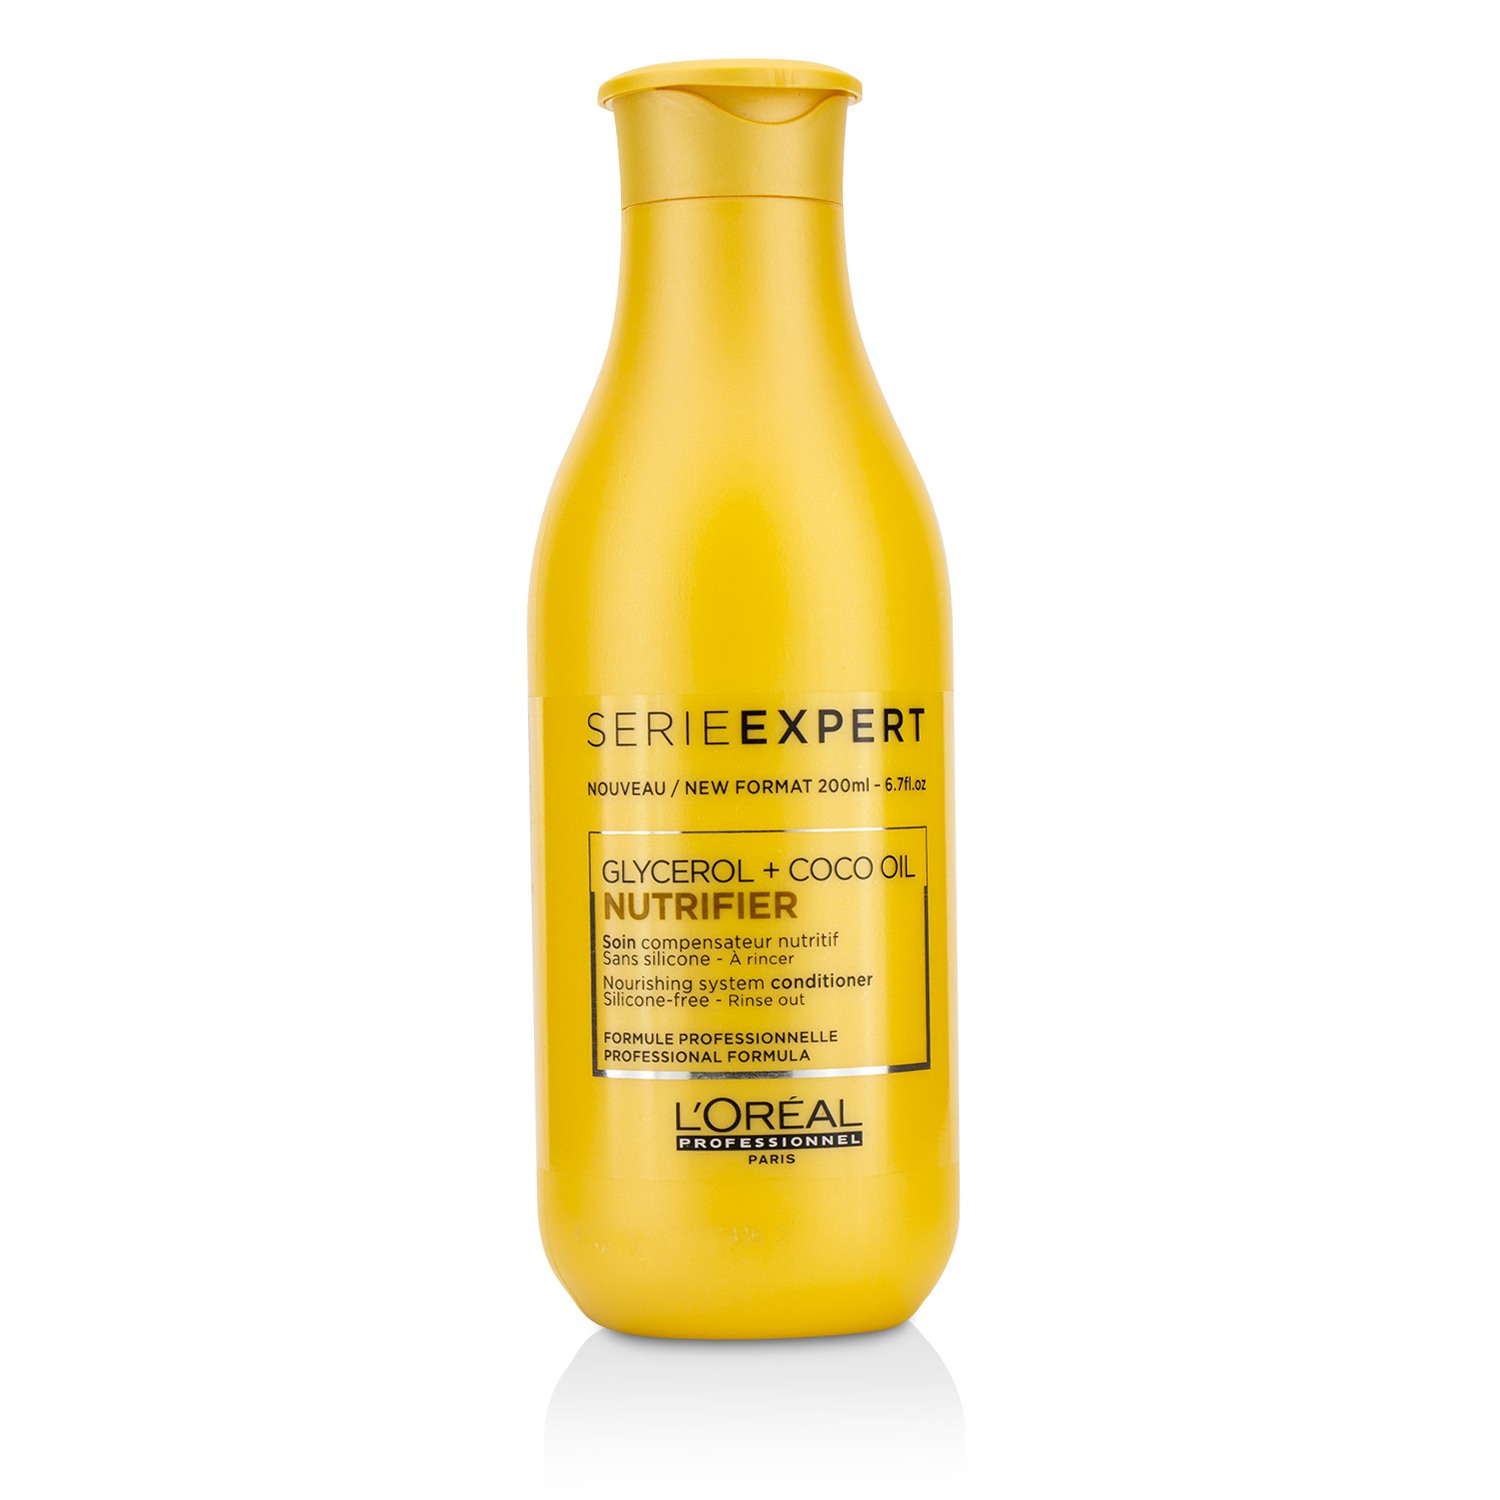 Professionnel Serie Expert - Nutrifier Glycerol + Coco Oil Nourishing System Silicone-Free Conditioner LOreal Image